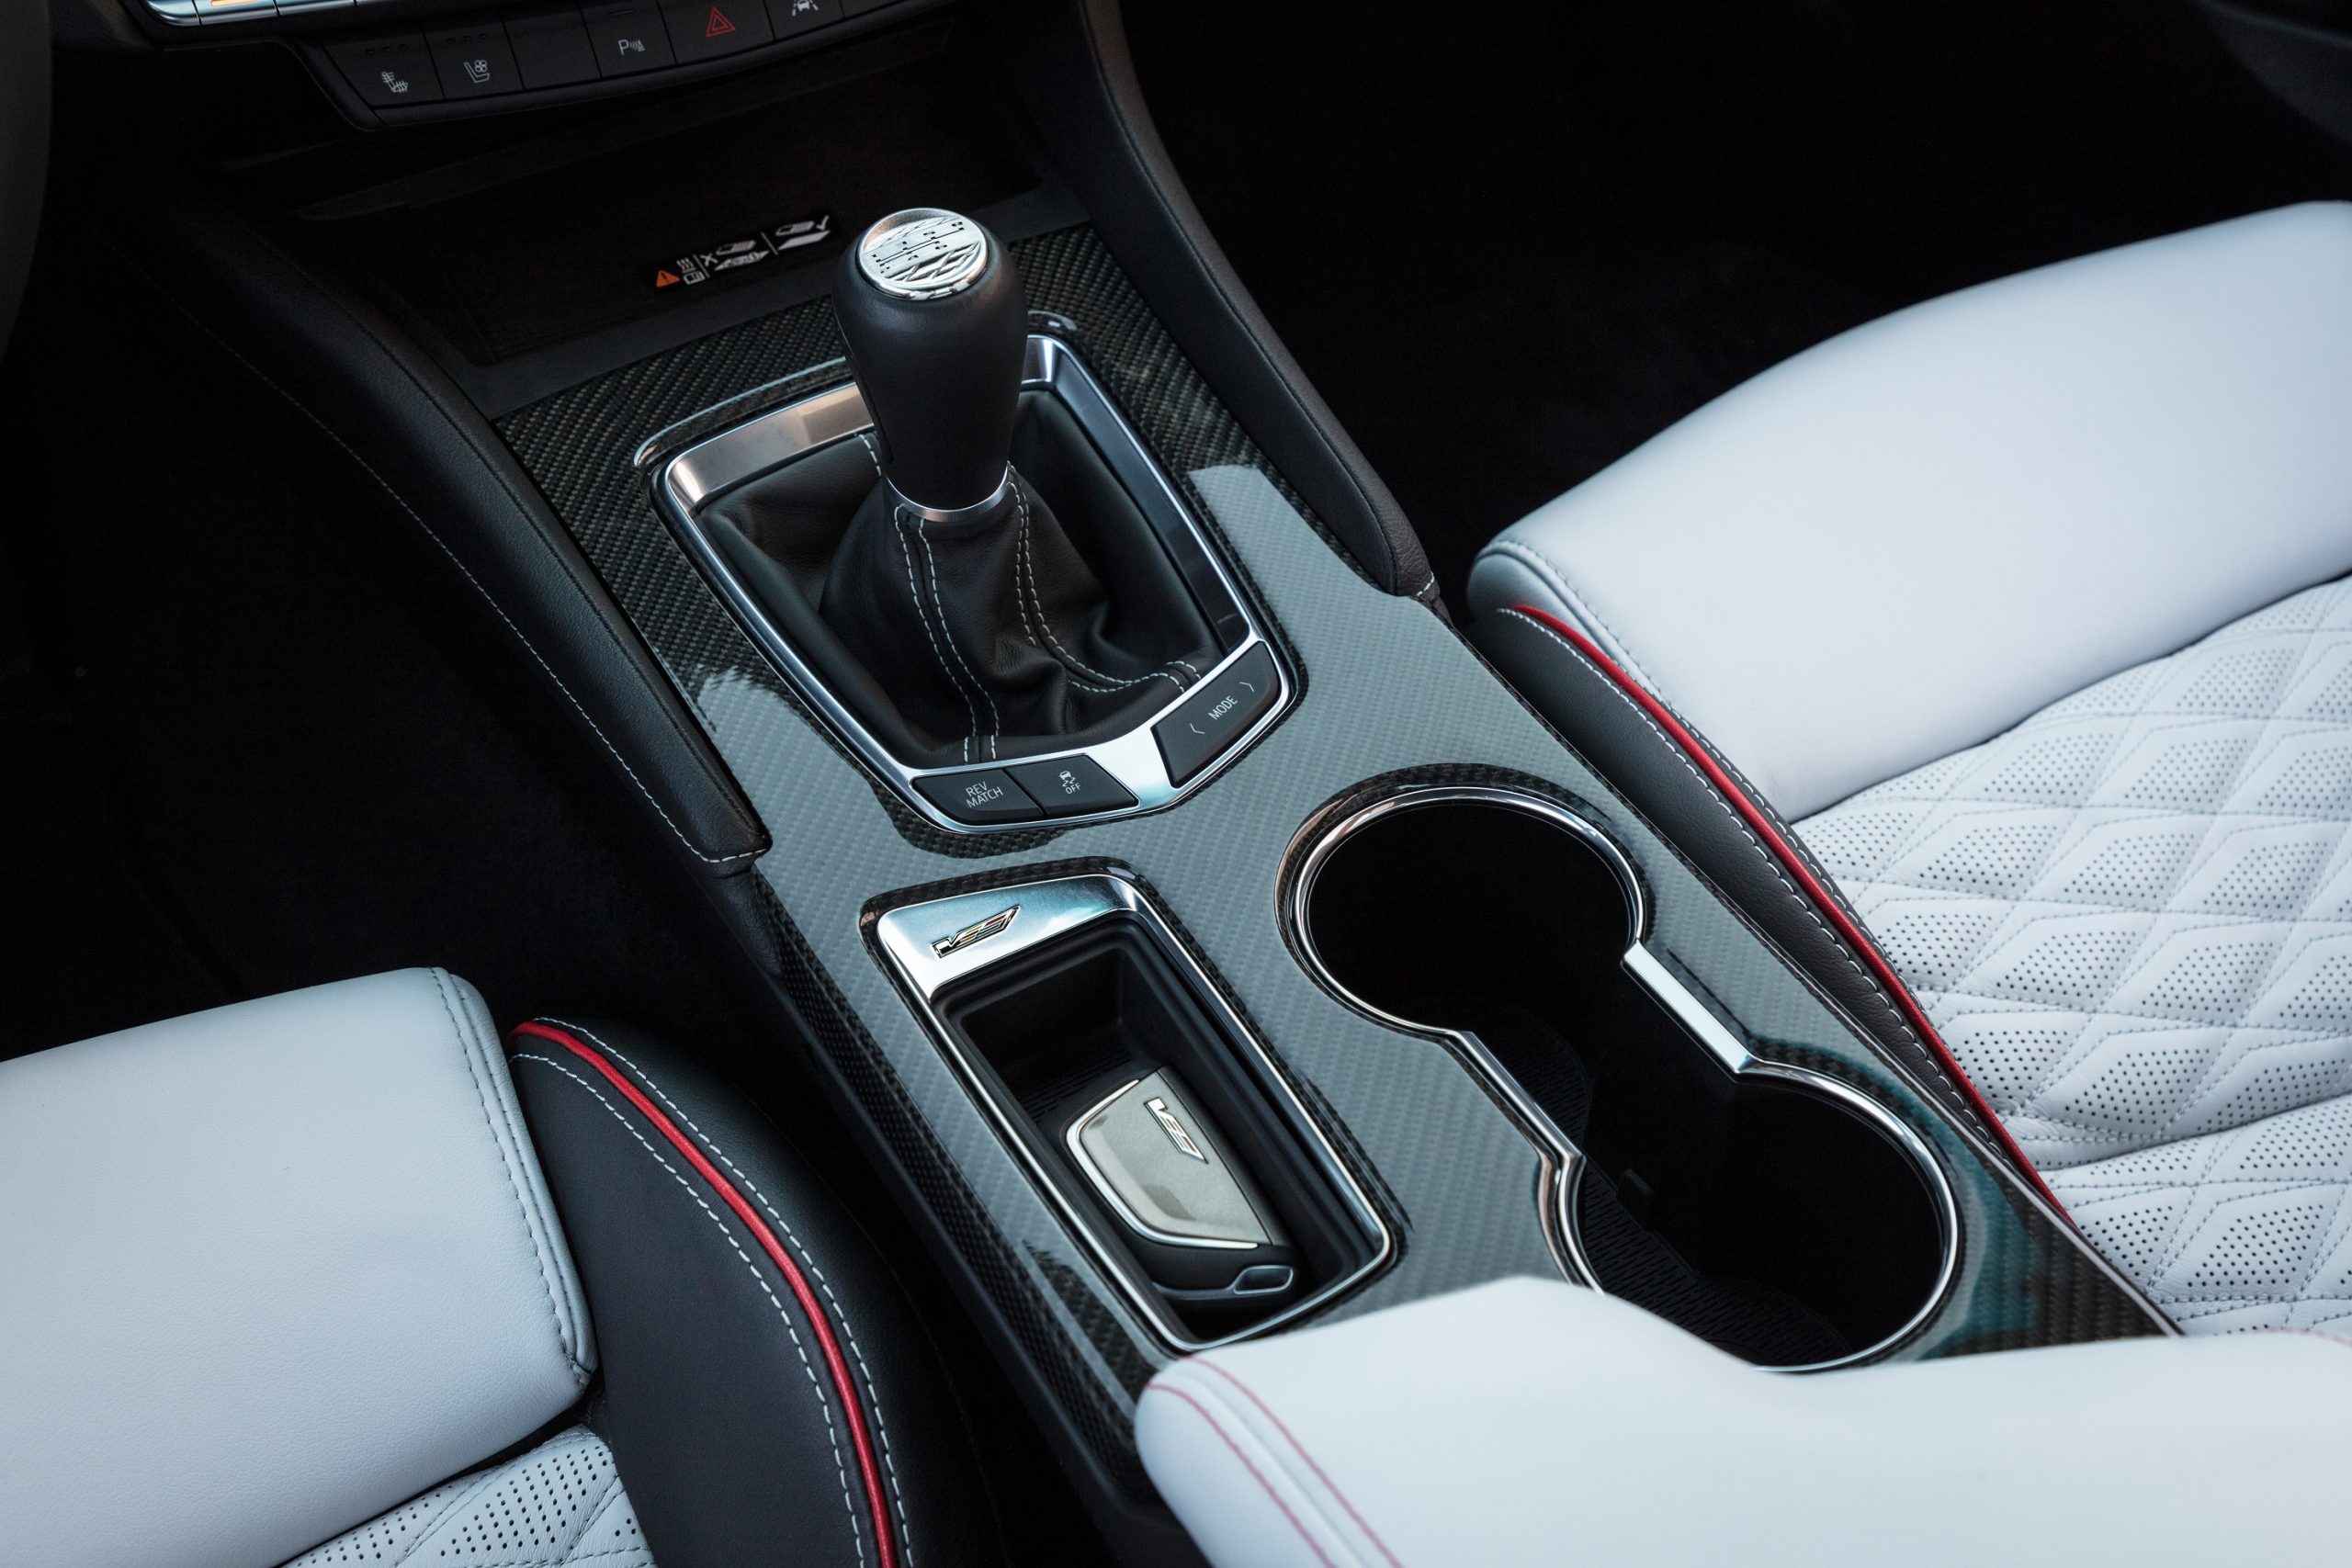 The carbon-fiber center console of a 2022 Cadillac CT4-V Blackwing with a manual transmission